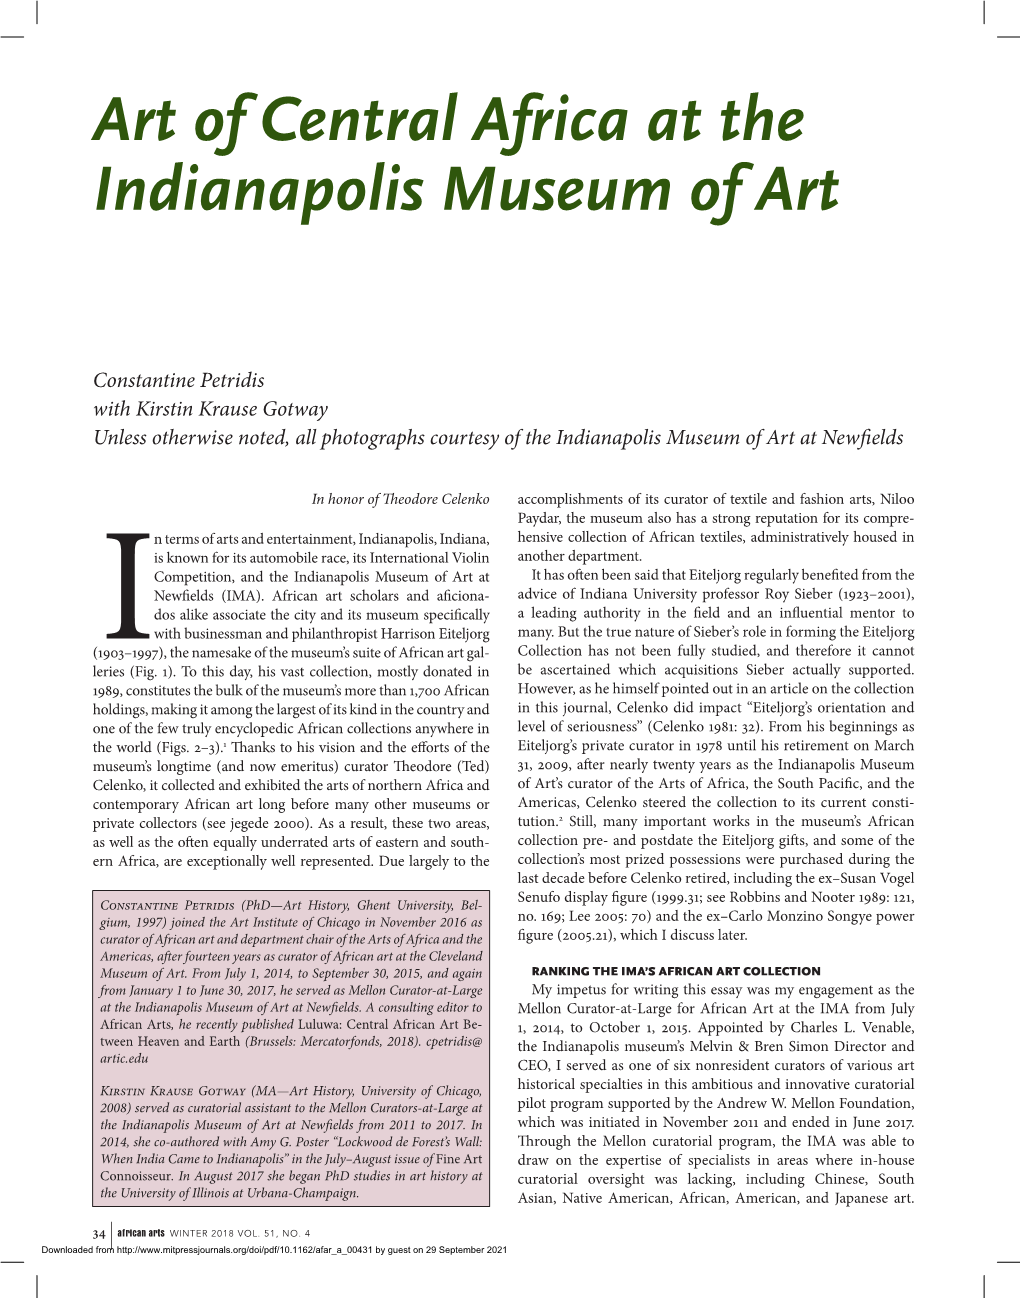 Art of Central Africa at the Indianapolis Museum of Art